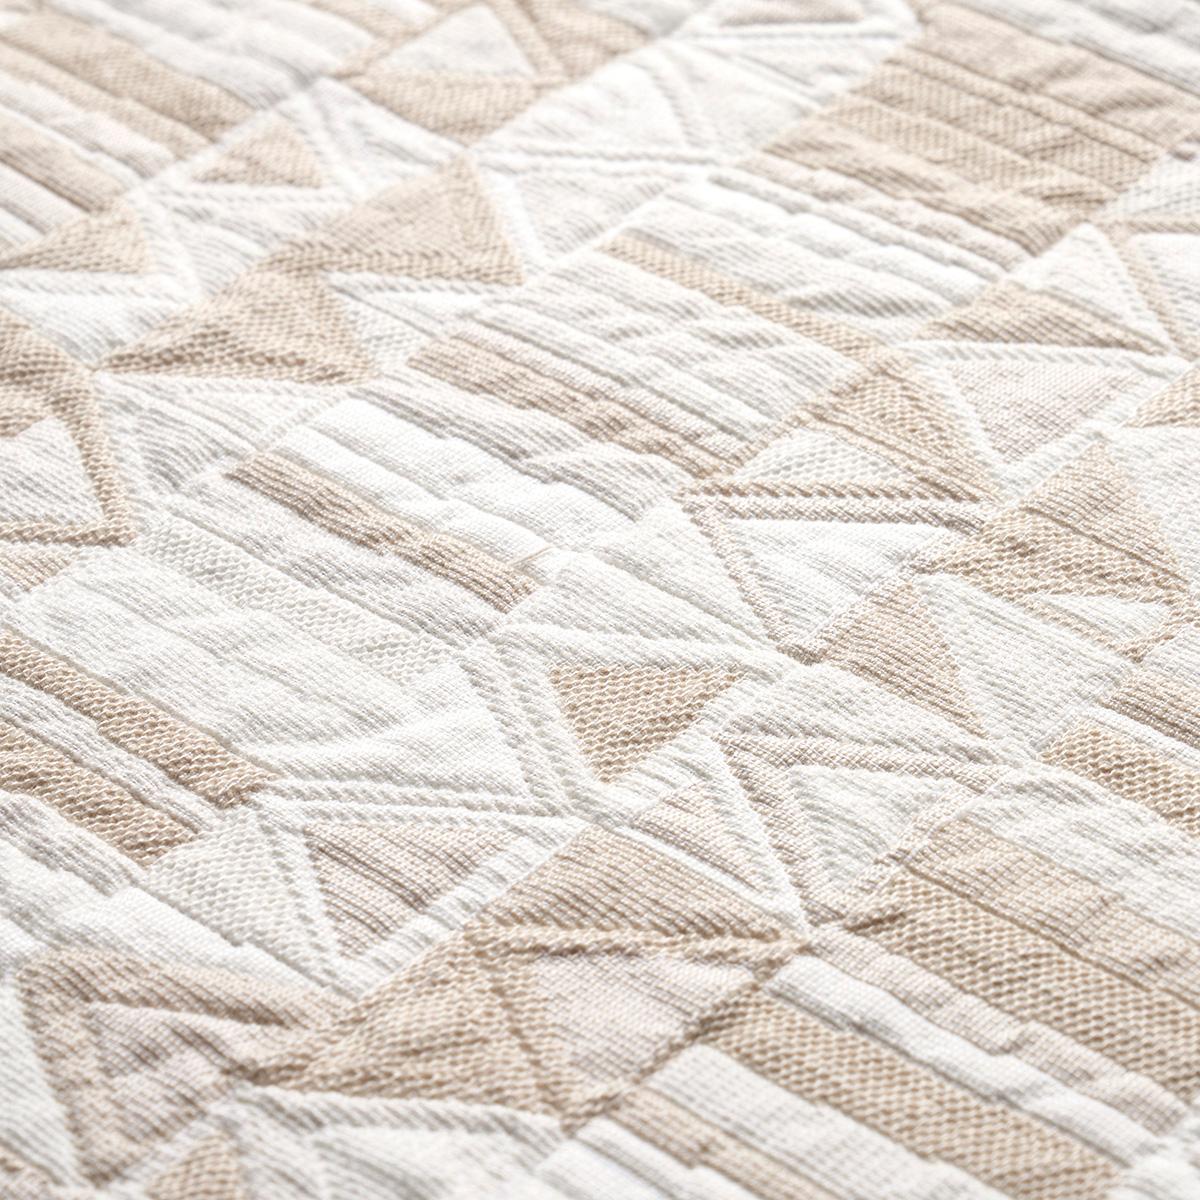 BIZANTINO QUILTED WEAVE_NATURAL